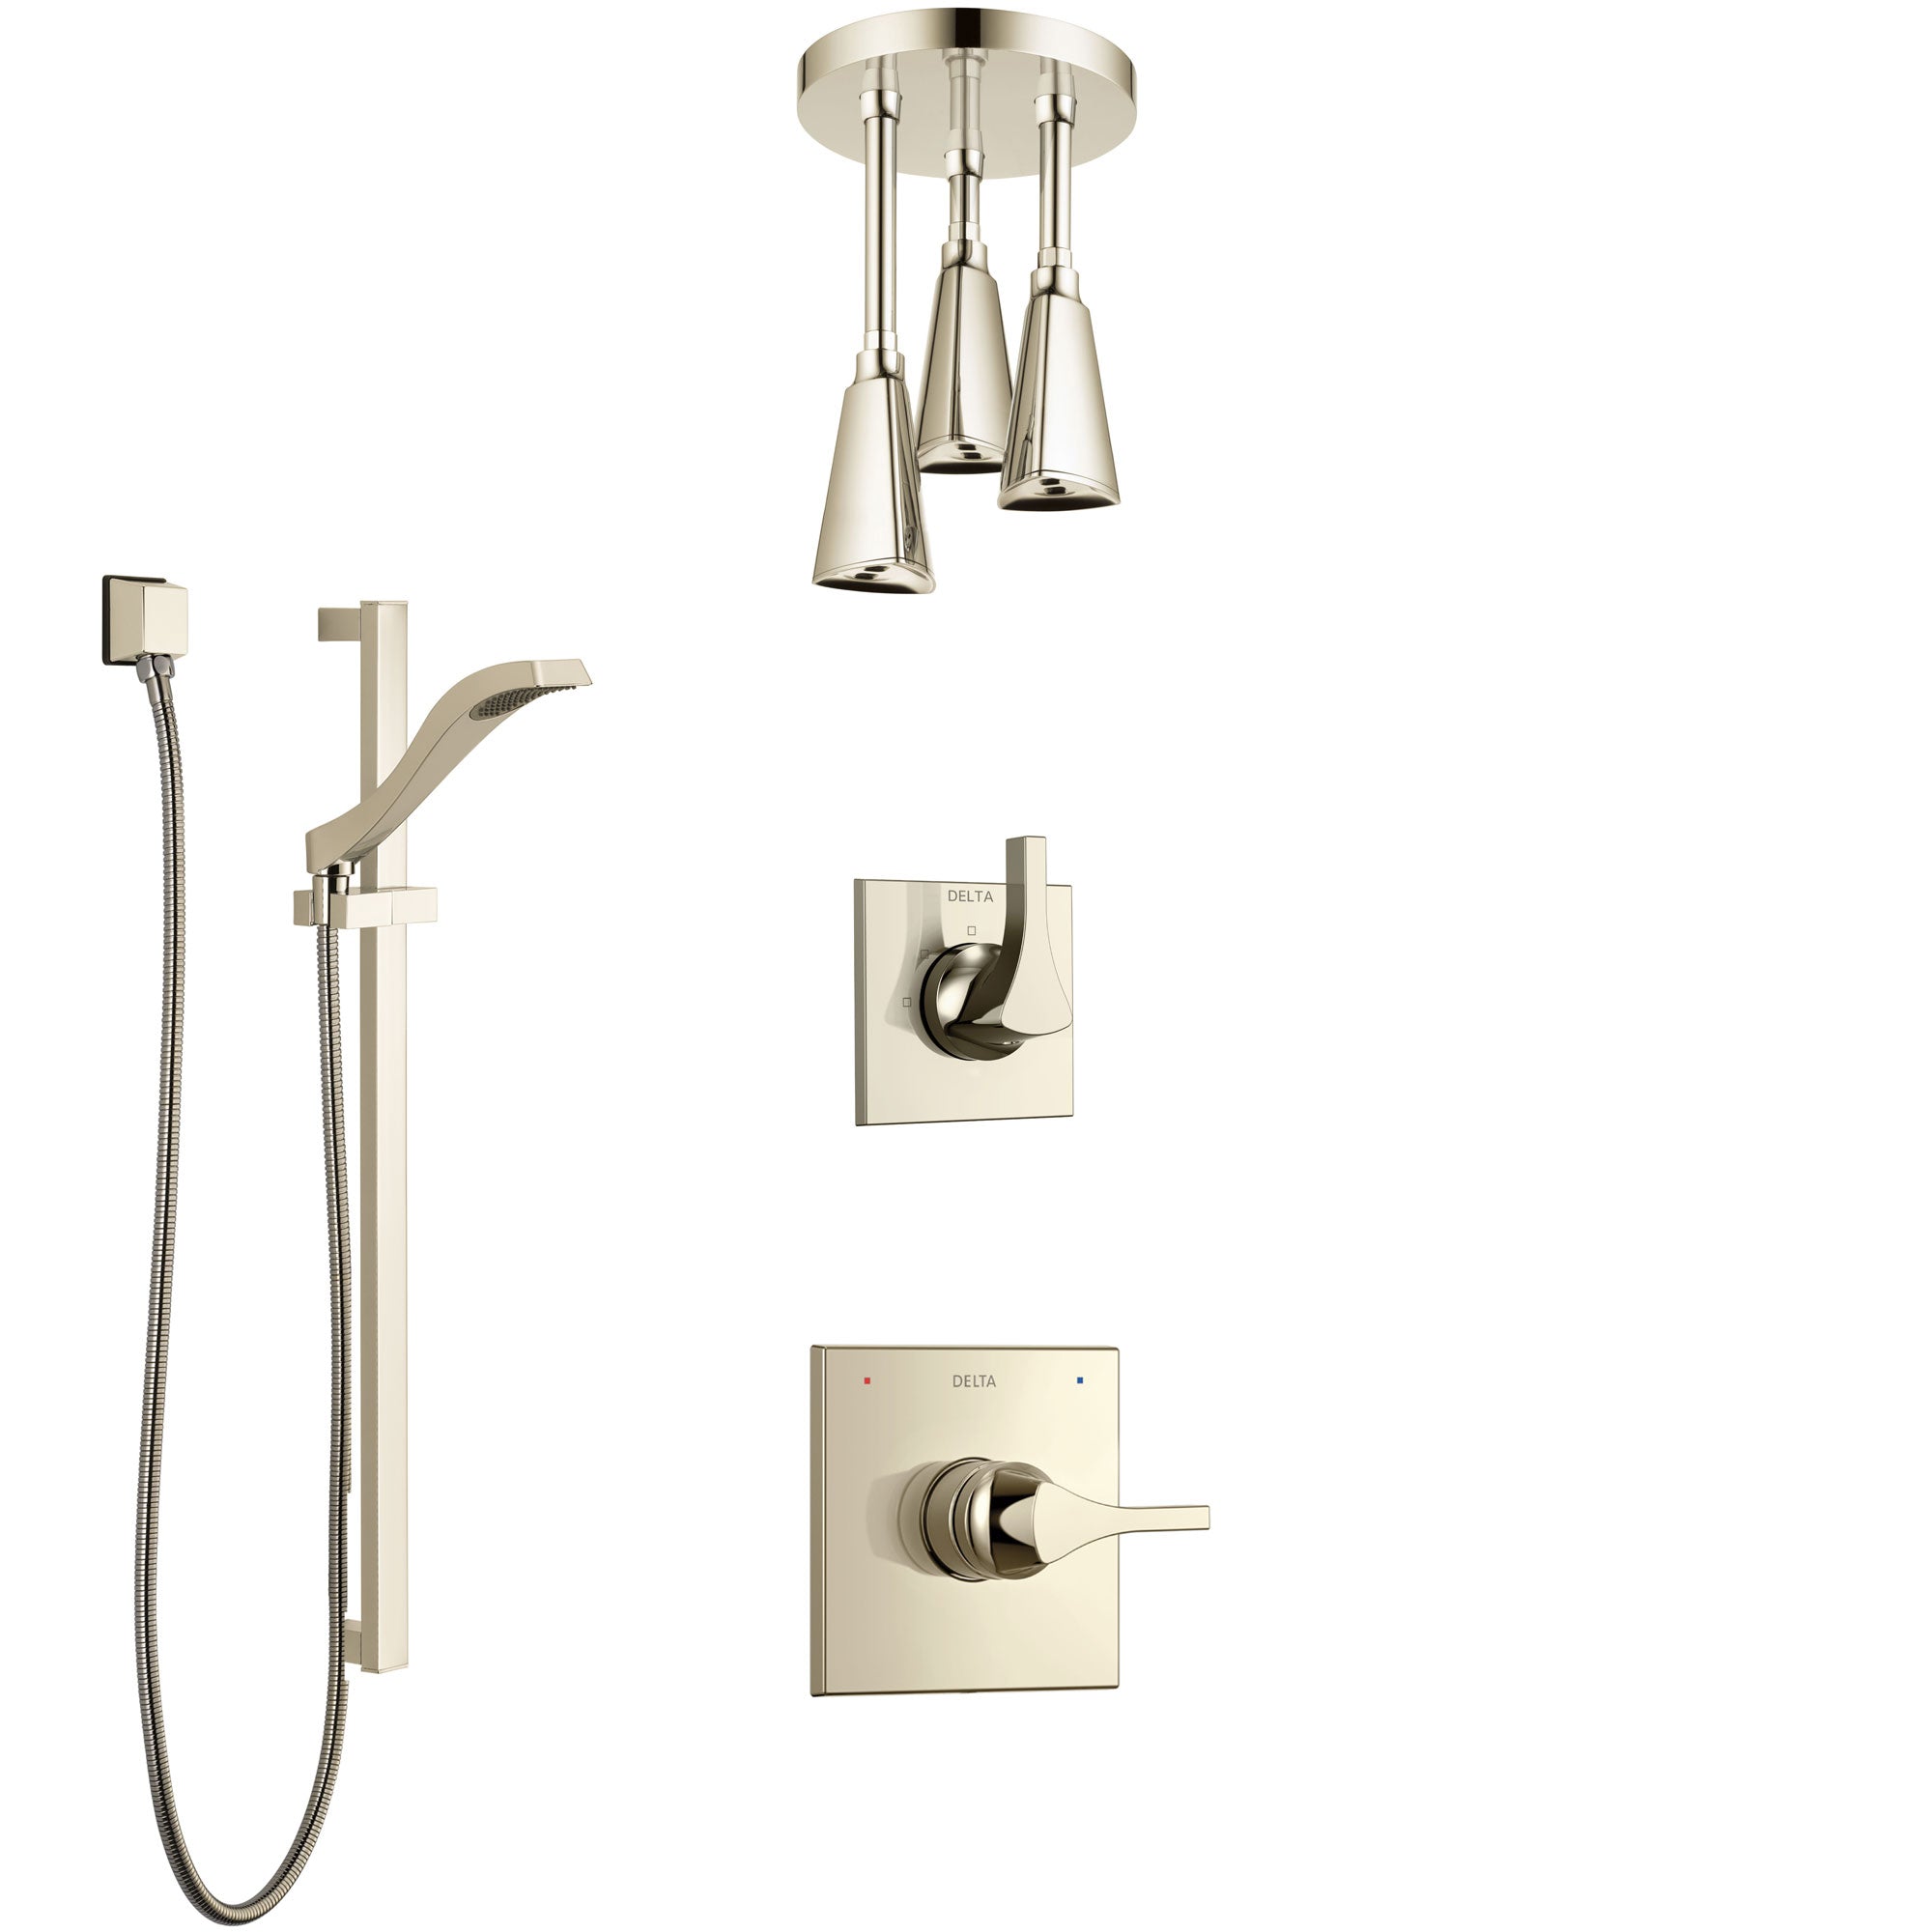 Delta Zura Polished Nickel Shower System with Control Handle, 3-Setting Diverter, Ceiling Mount Showerhead, and Hand Shower with Slidebar SS1474PN8